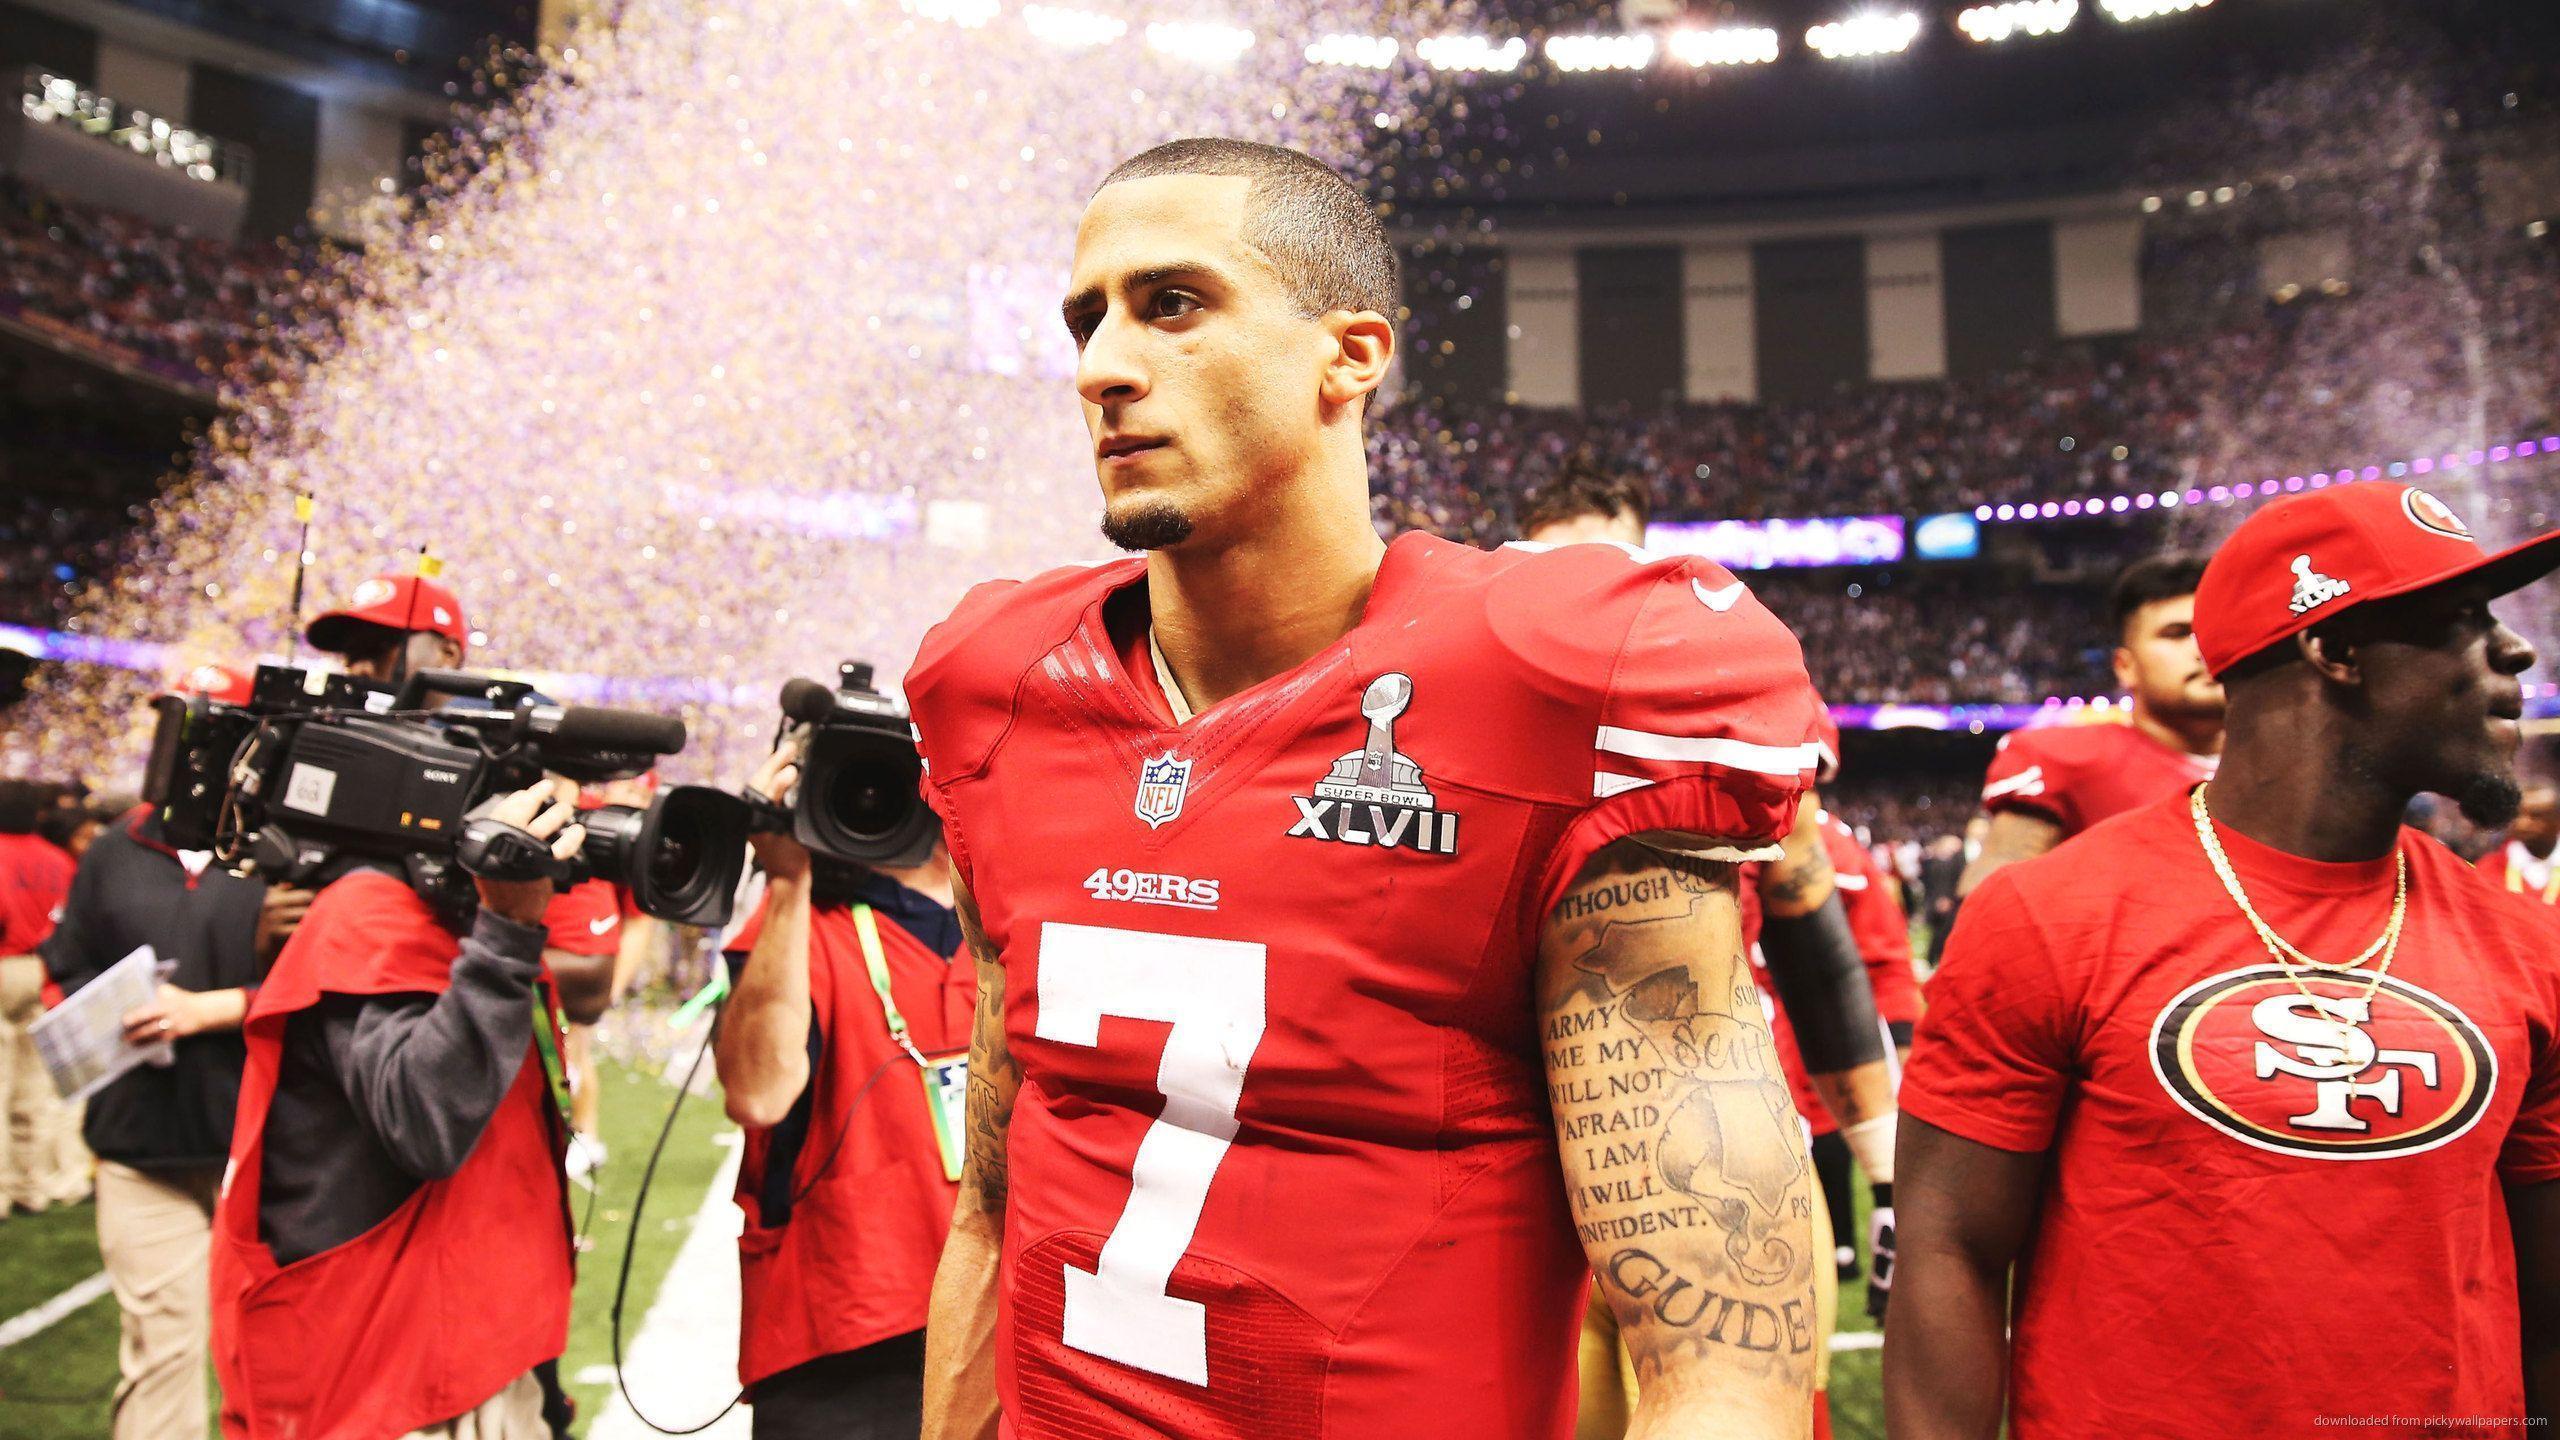 Download 2560x1440 Colin Kaepernick After The Game Wallpaper